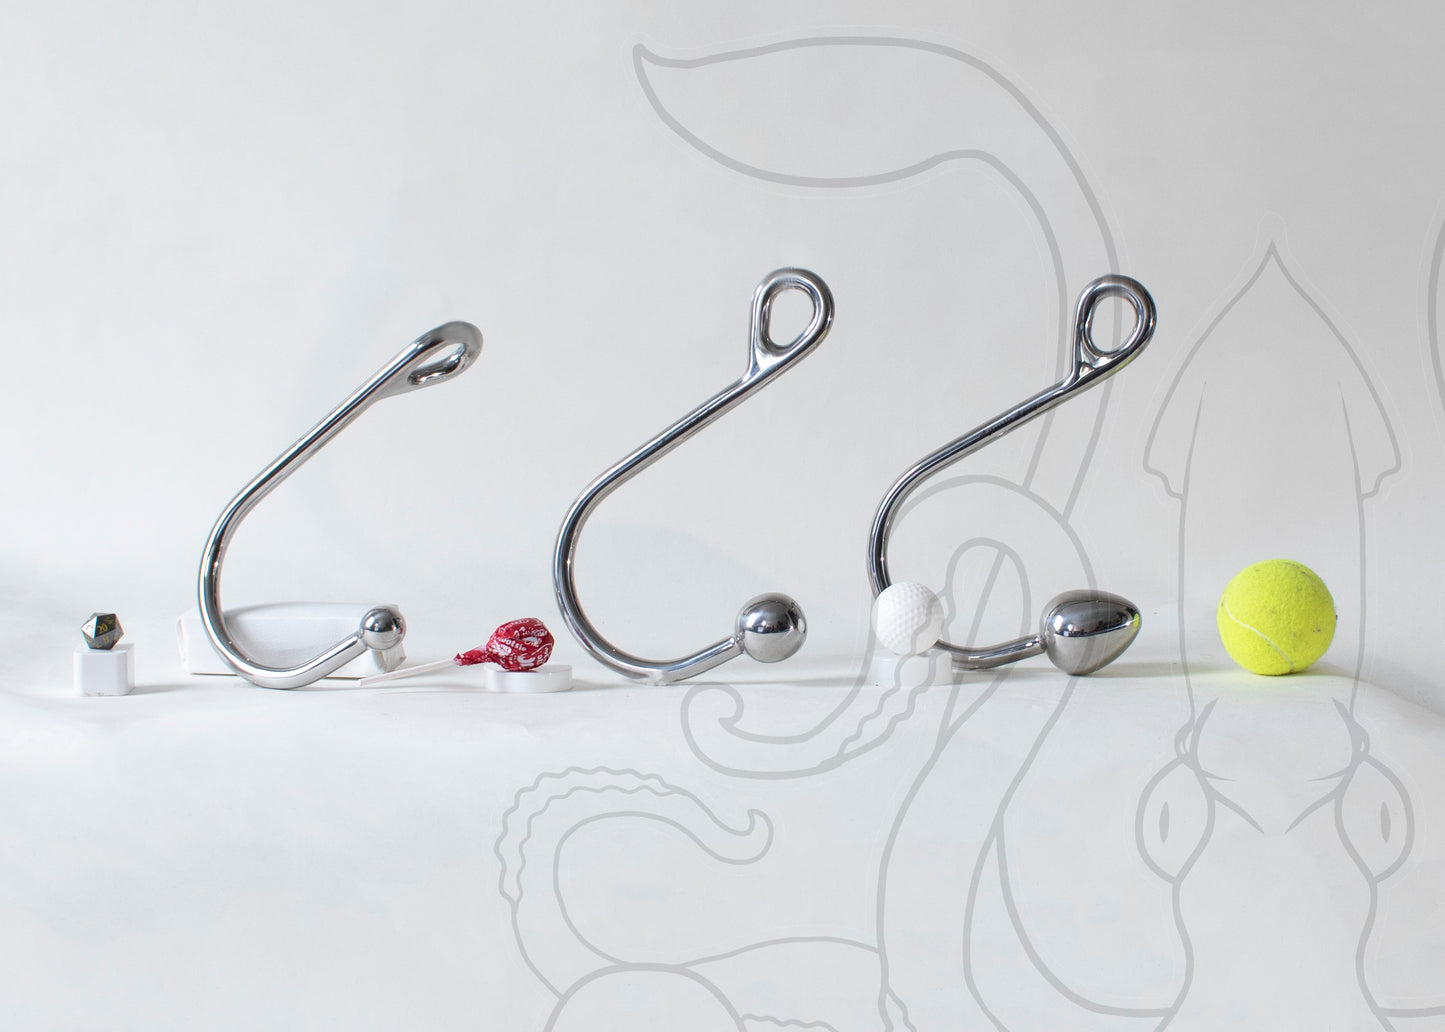 Clearance Sale: Seconds Bondage Hook – Solid Stainless Steel Rope Hooks